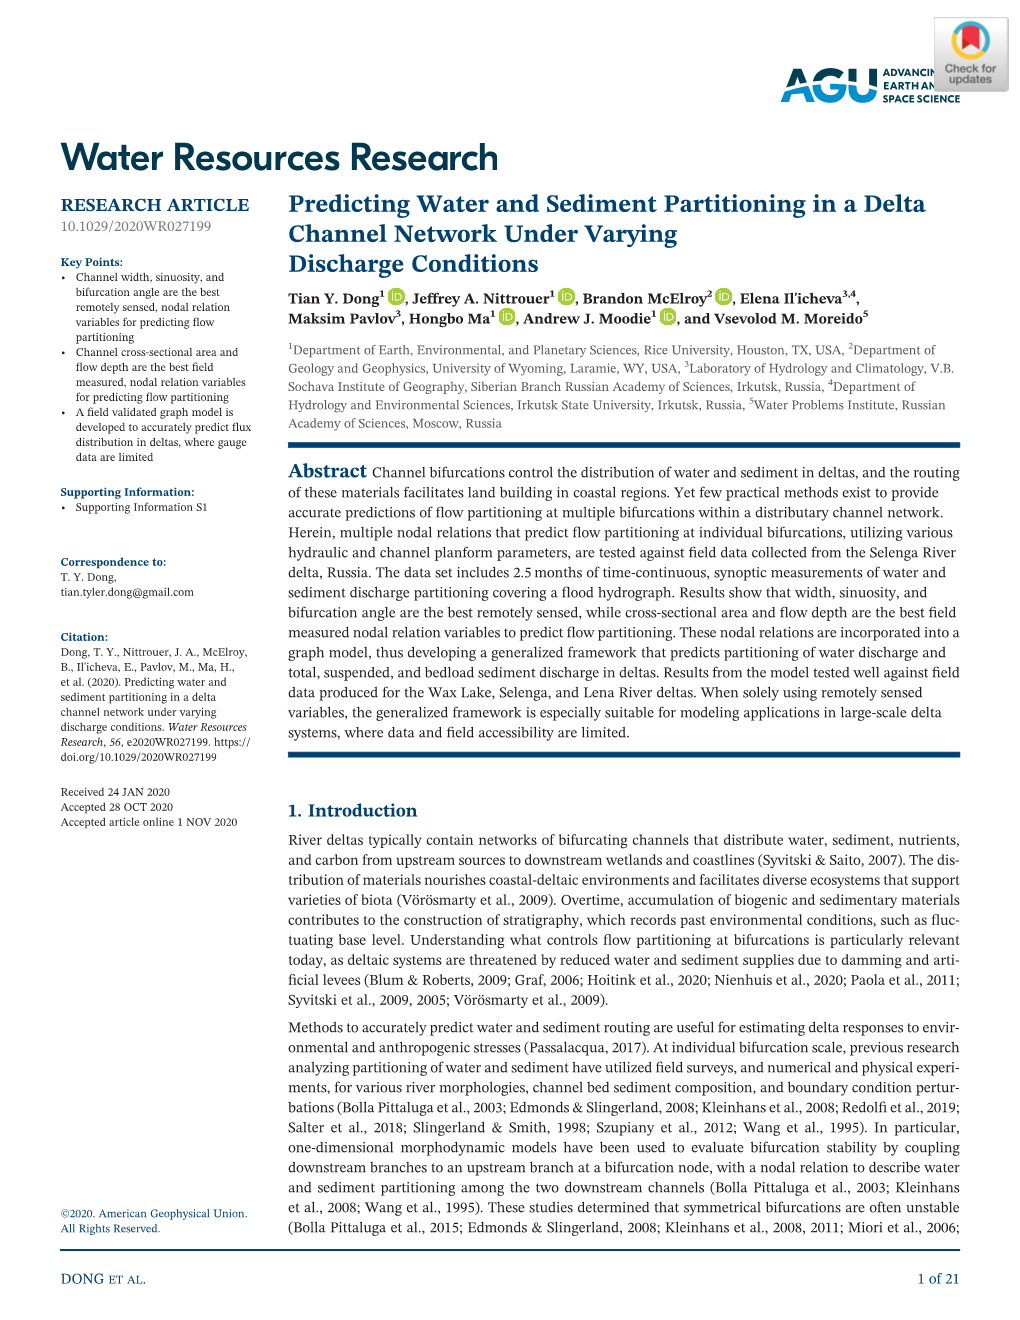 Predicting Water and Sediment Partitioning in a Delta Channel